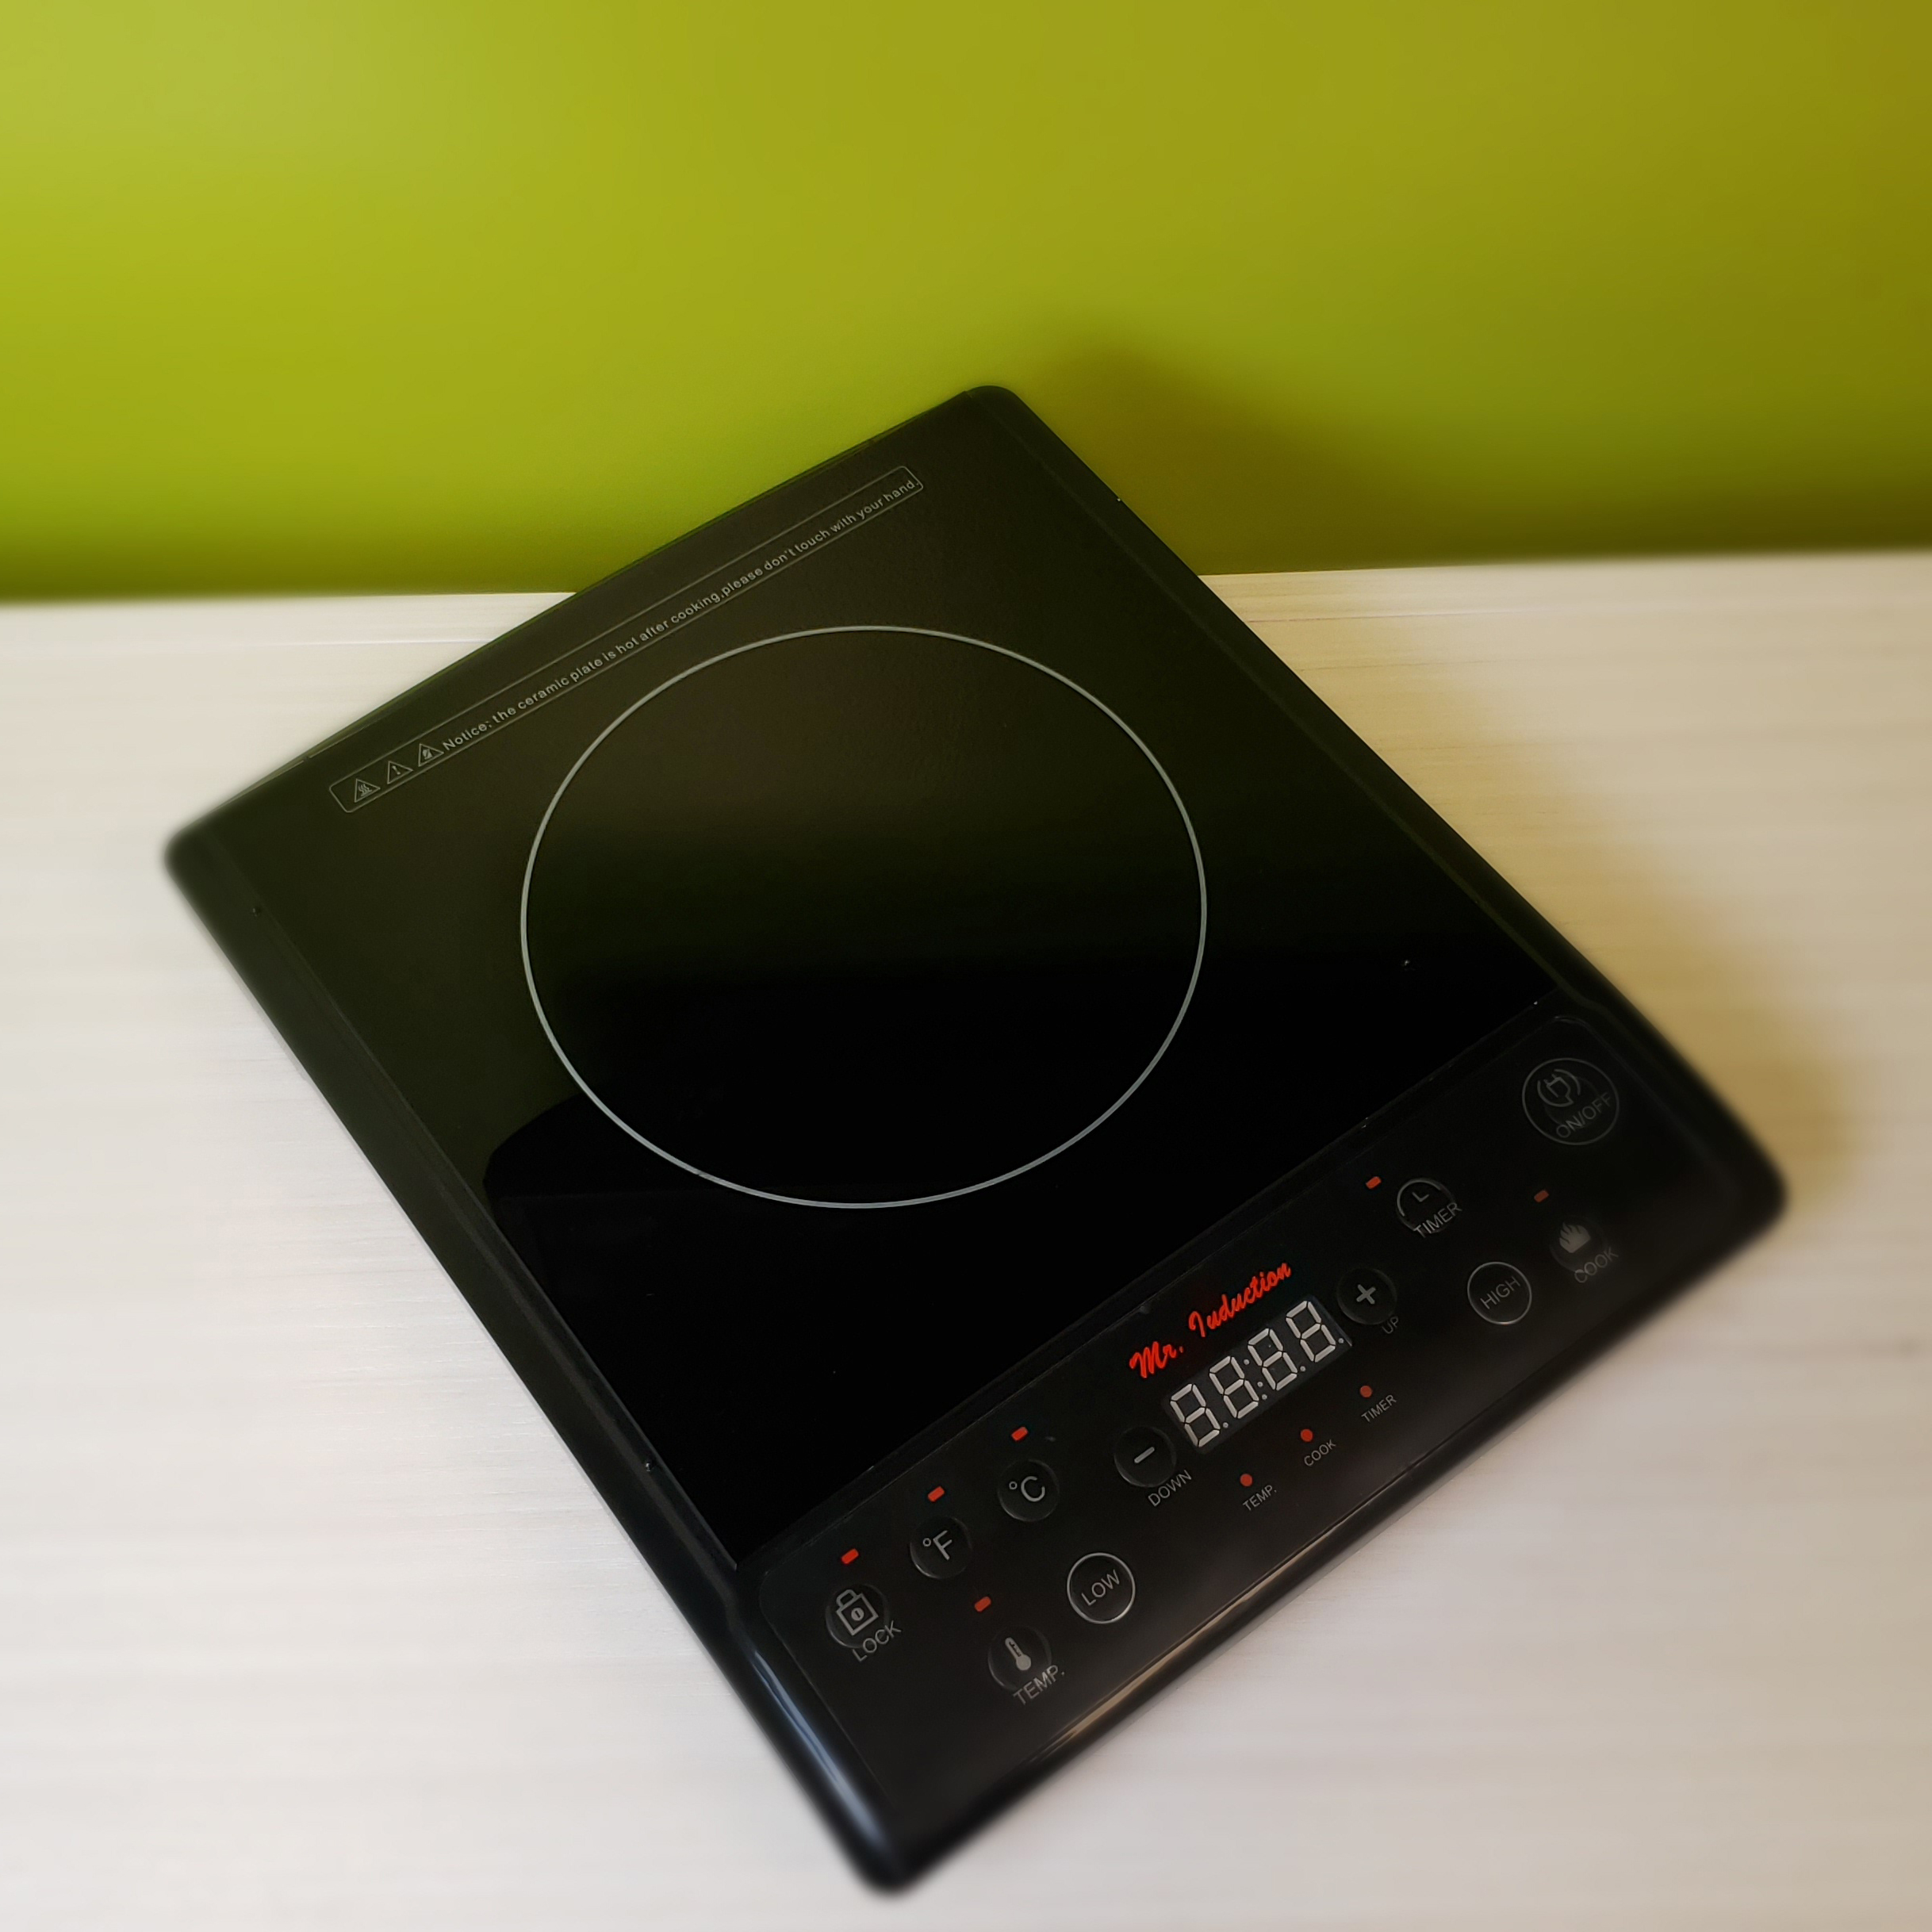 A black induction cooktop on a wooden shelf